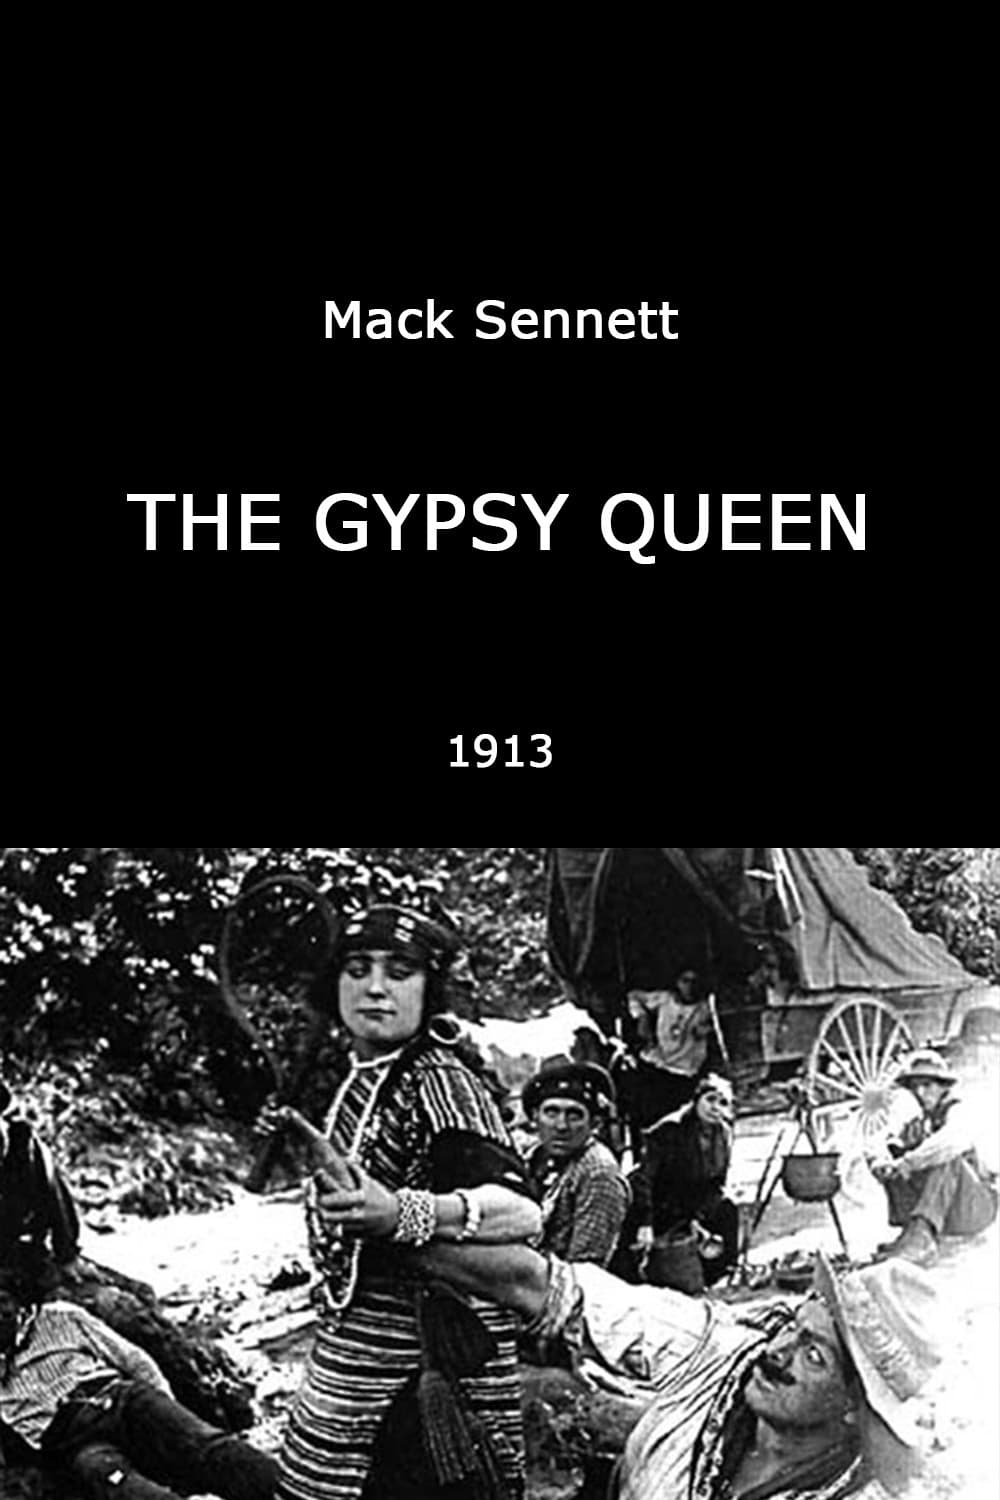 The Gypsy Queen (1913)